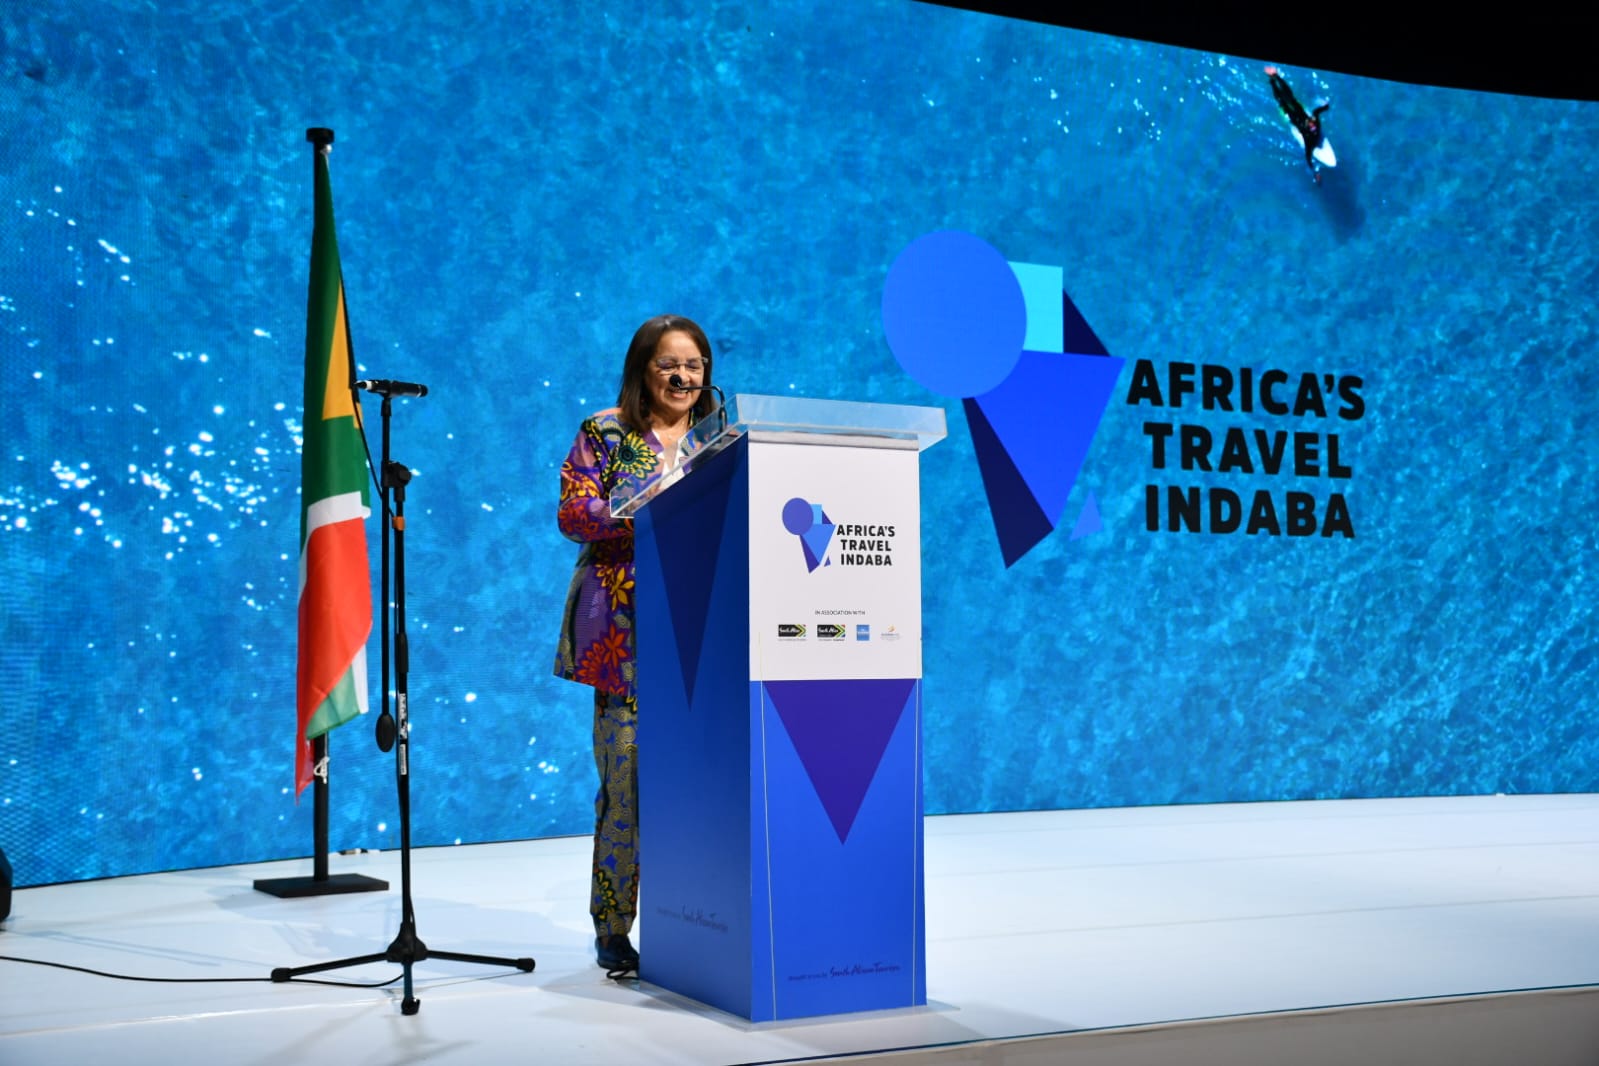 Speech by Minister of Tourism, Patricia de Lille at the opening of Africa’s Travel Indaba 2023